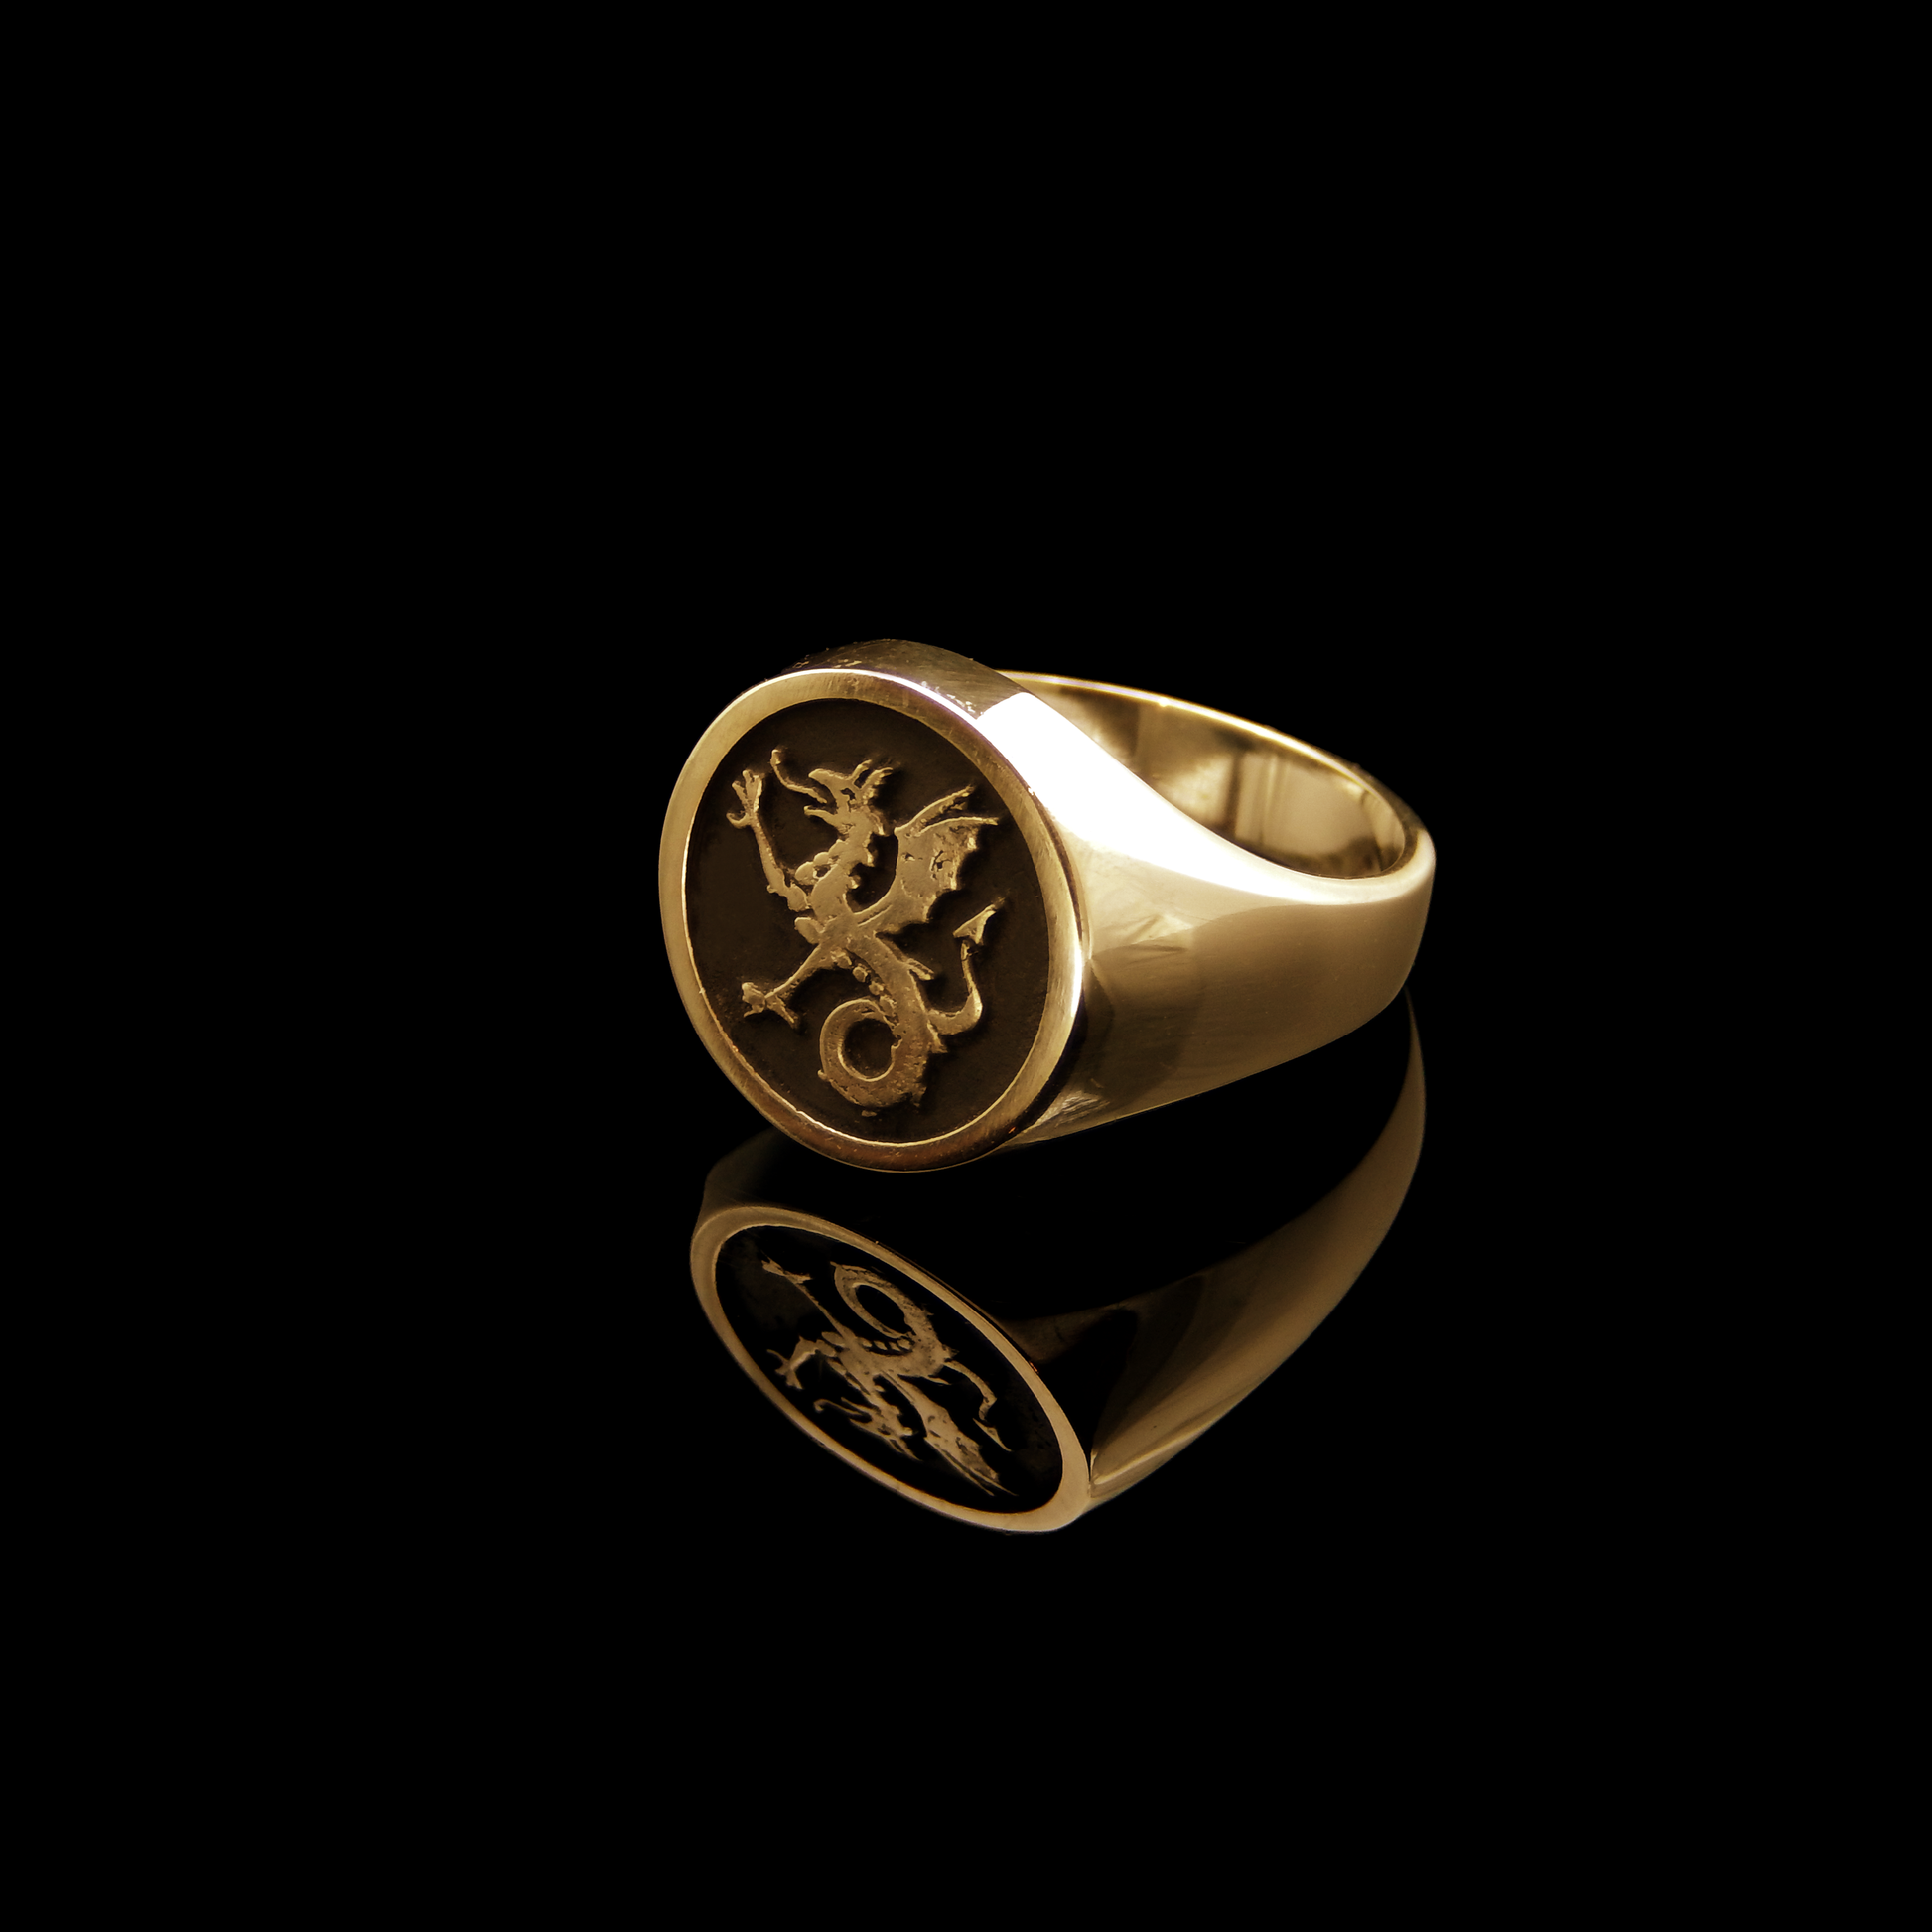 Solid Gold Ring, Gold Ring Quarter View, Dragon Ring, Signet Ring, Historical Ring, Heraldry, Wyvern, Wyvern Ring,  Yellow Gold Ring, Gold, Magic Ring, Fantasy Ring, Medieval Ring, Rings for Him, Gifts for Him, Mens Signet Ring